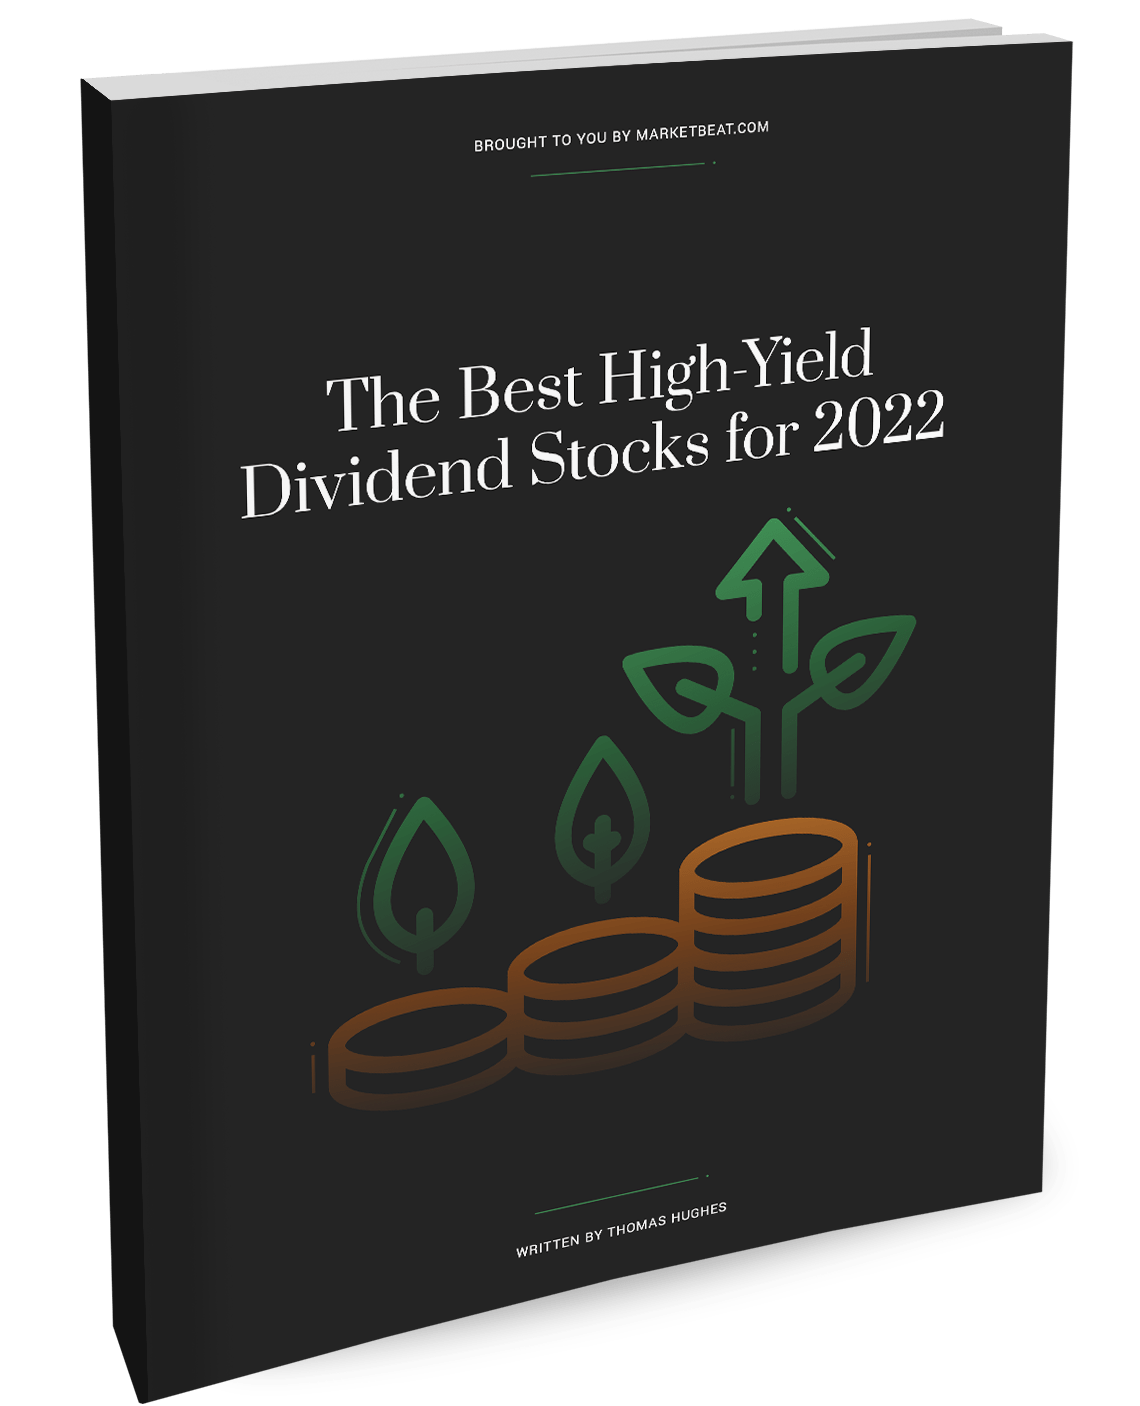 Best High Yield Dividend Stocks Covers for 2022